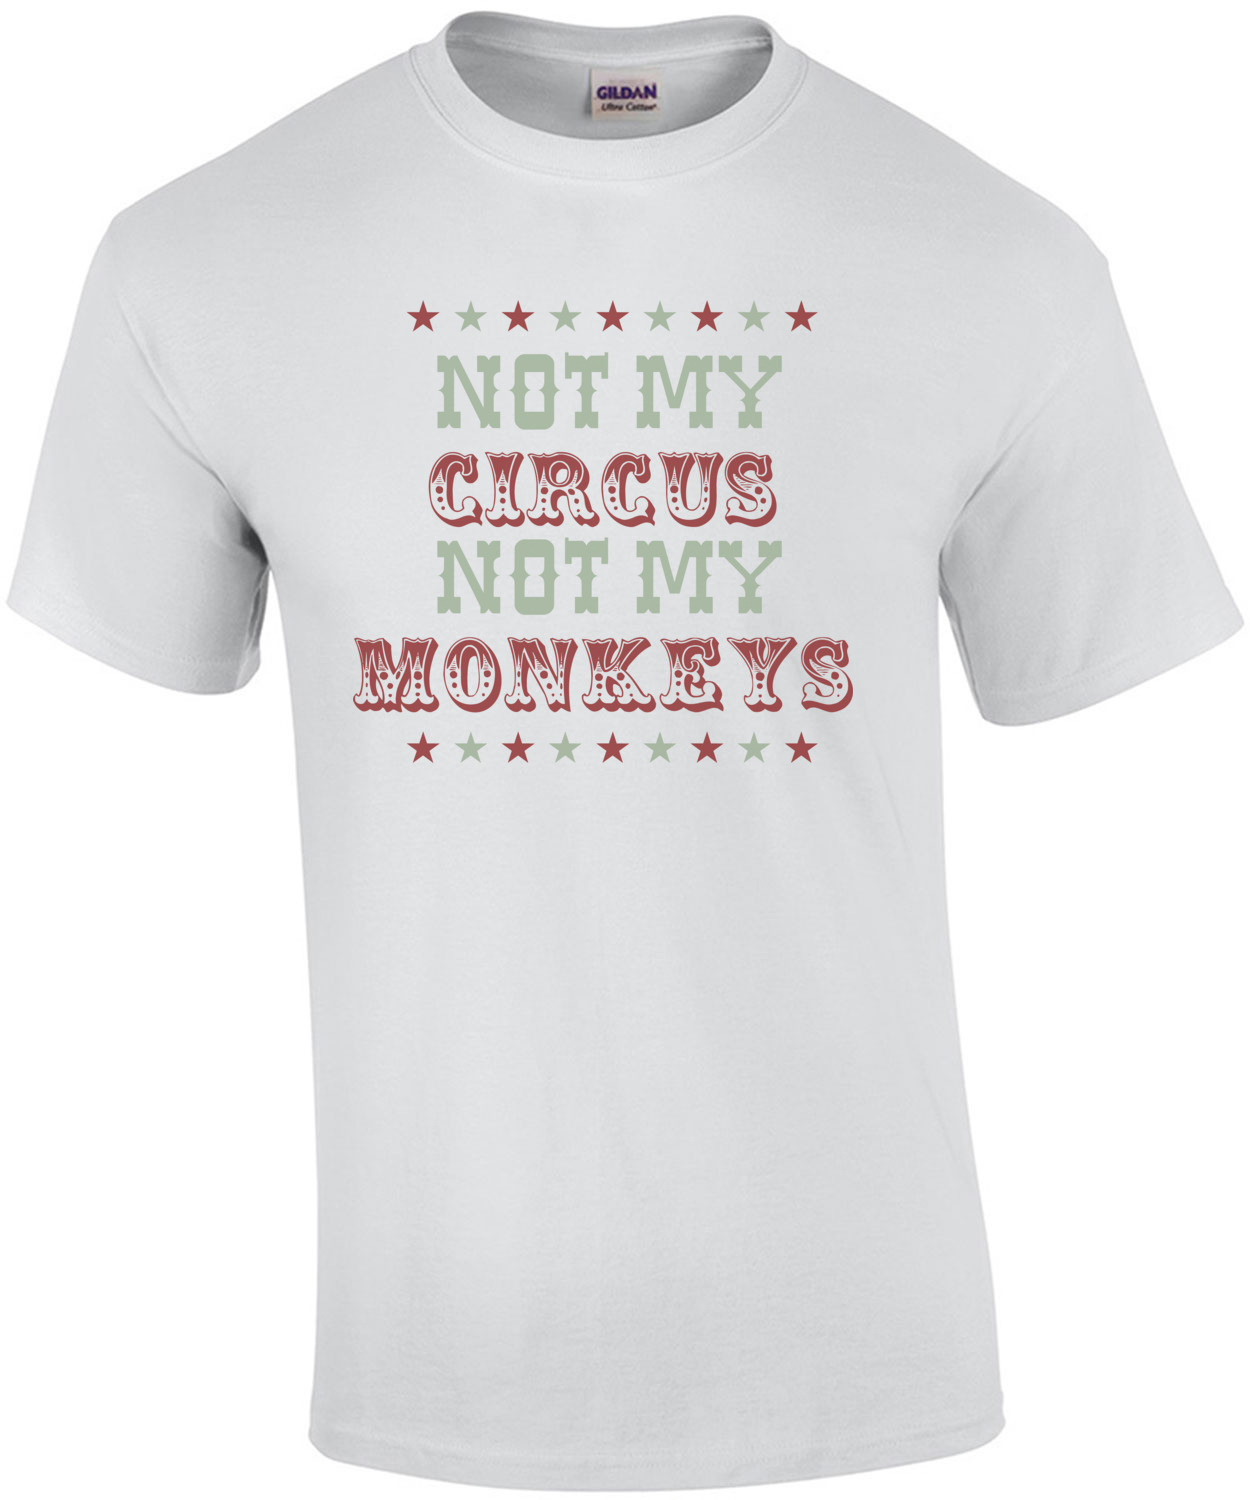 Not my circus not my monkeys - Funny